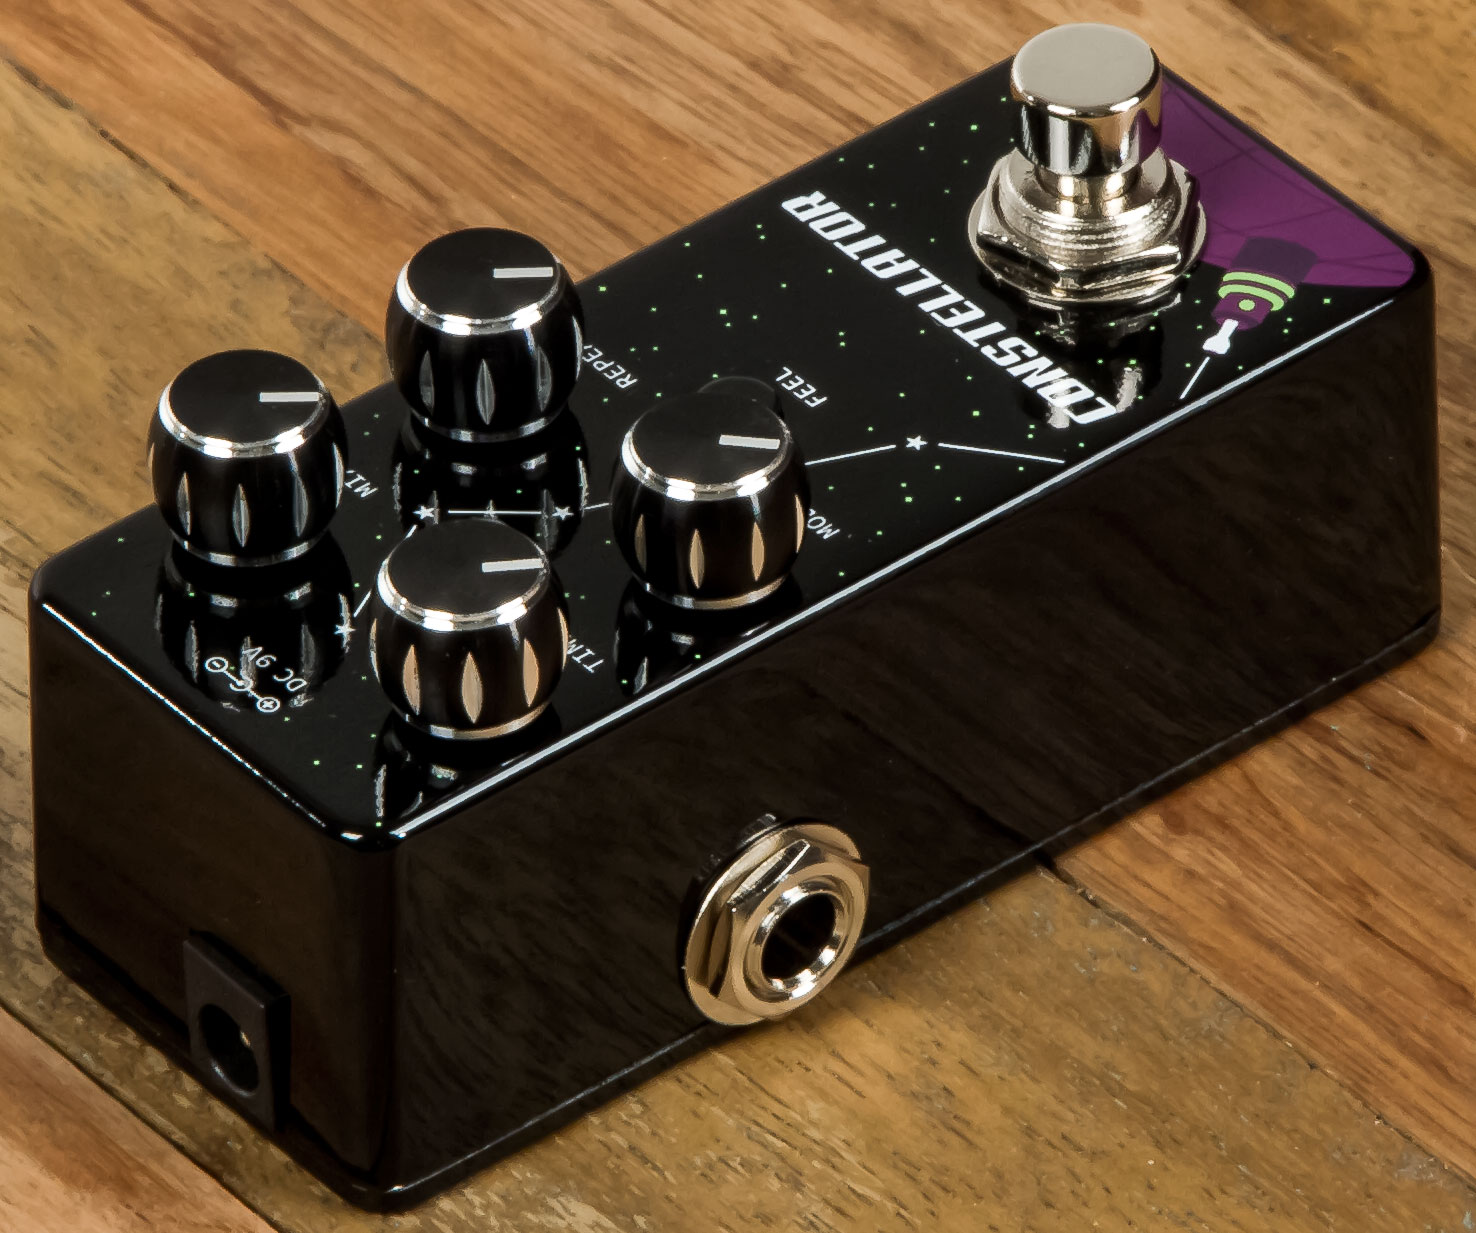 Pigtronix Constellator Modulated Analog Delay - Reverb, delay & echo effect pedal - Variation 2